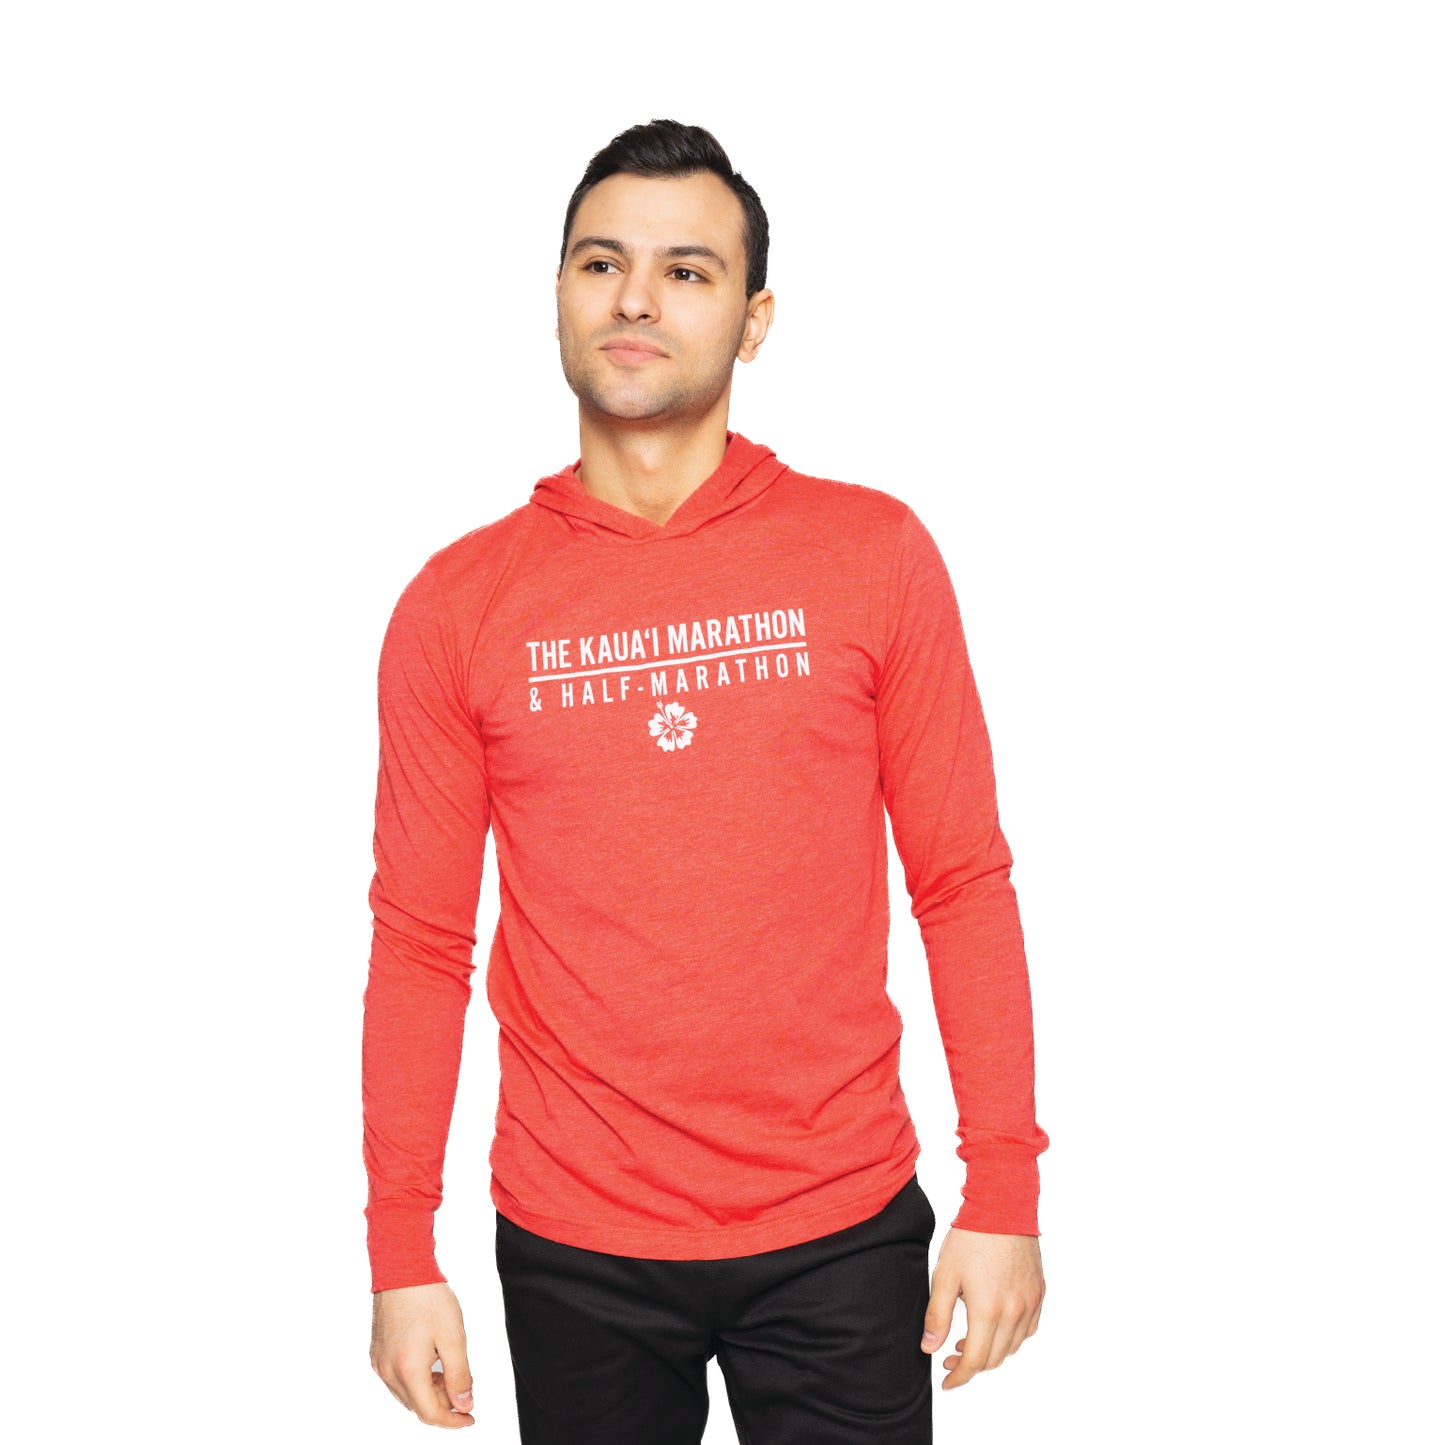 Base Layer Hoody - Heather Red w/Hibiscus Design